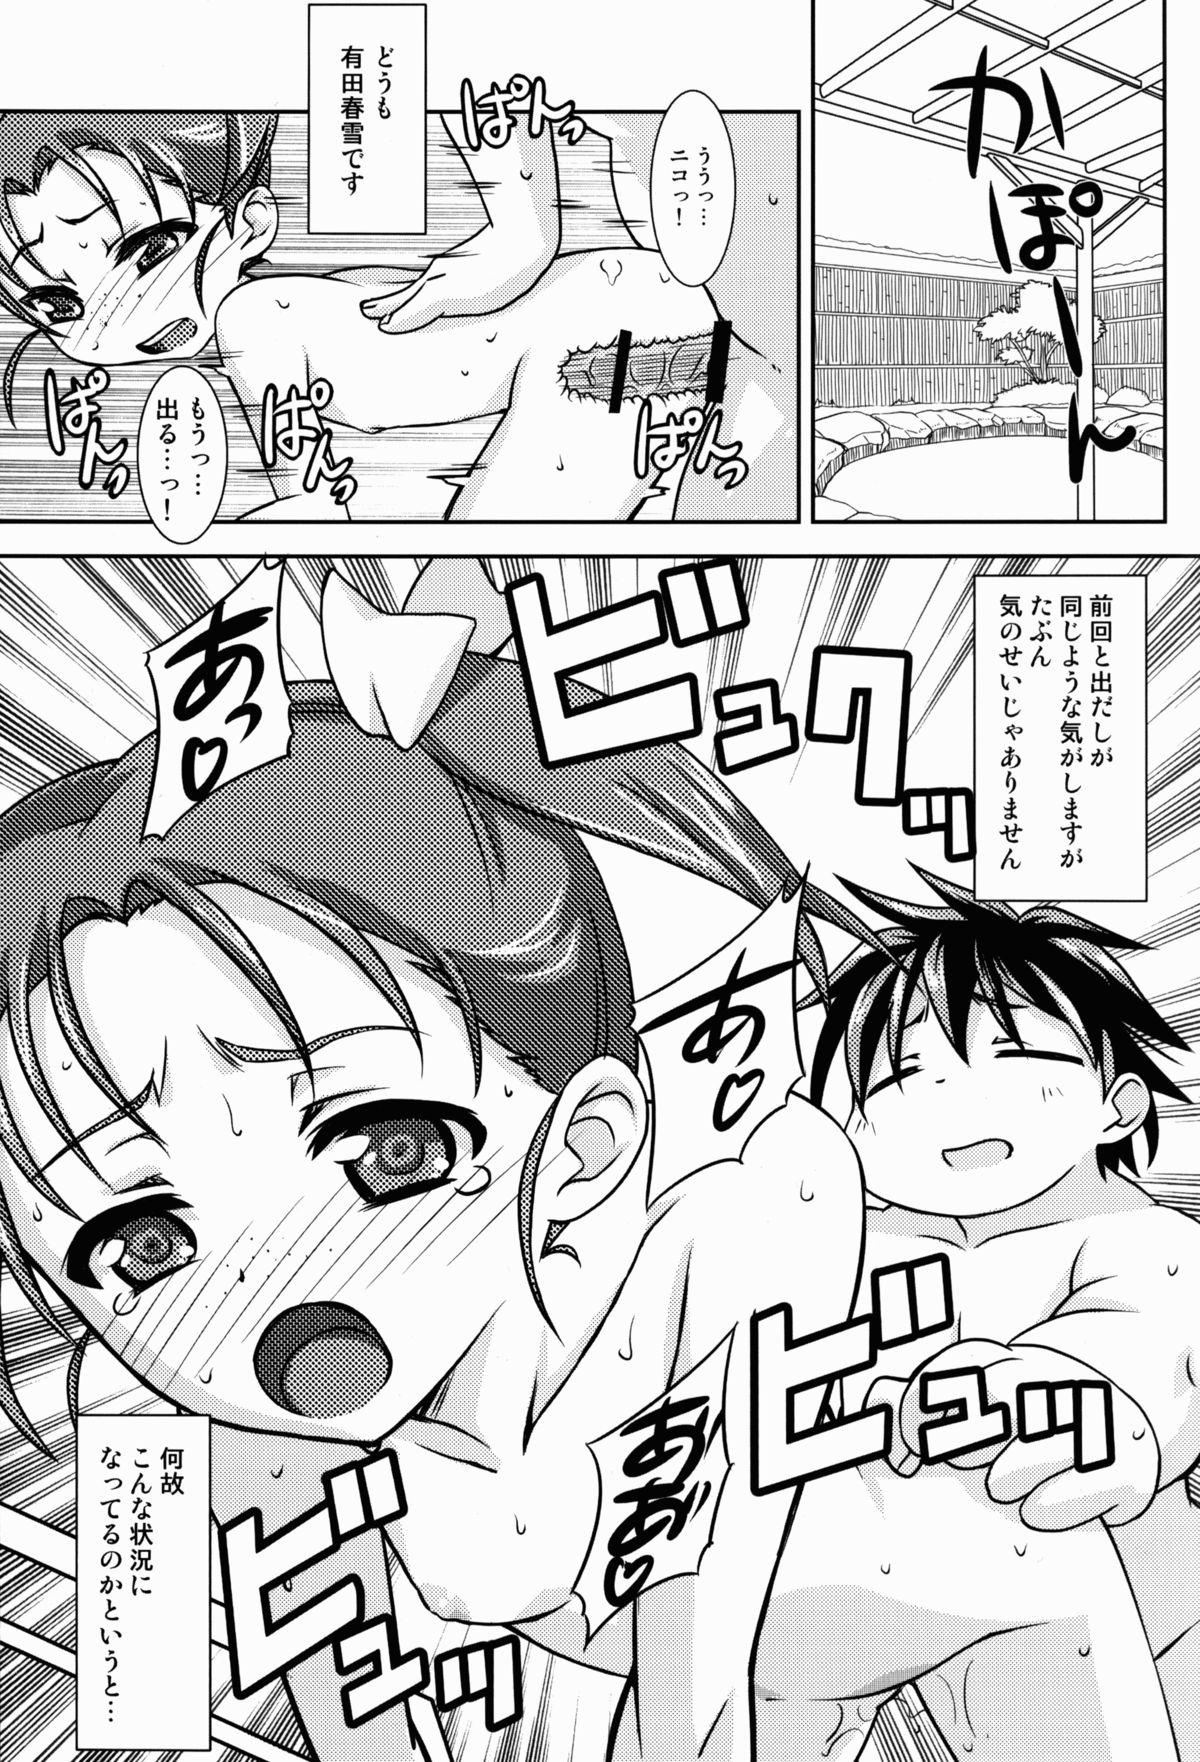 Doublepenetration Houkago Link 2 - Accel world Usa - Page 3